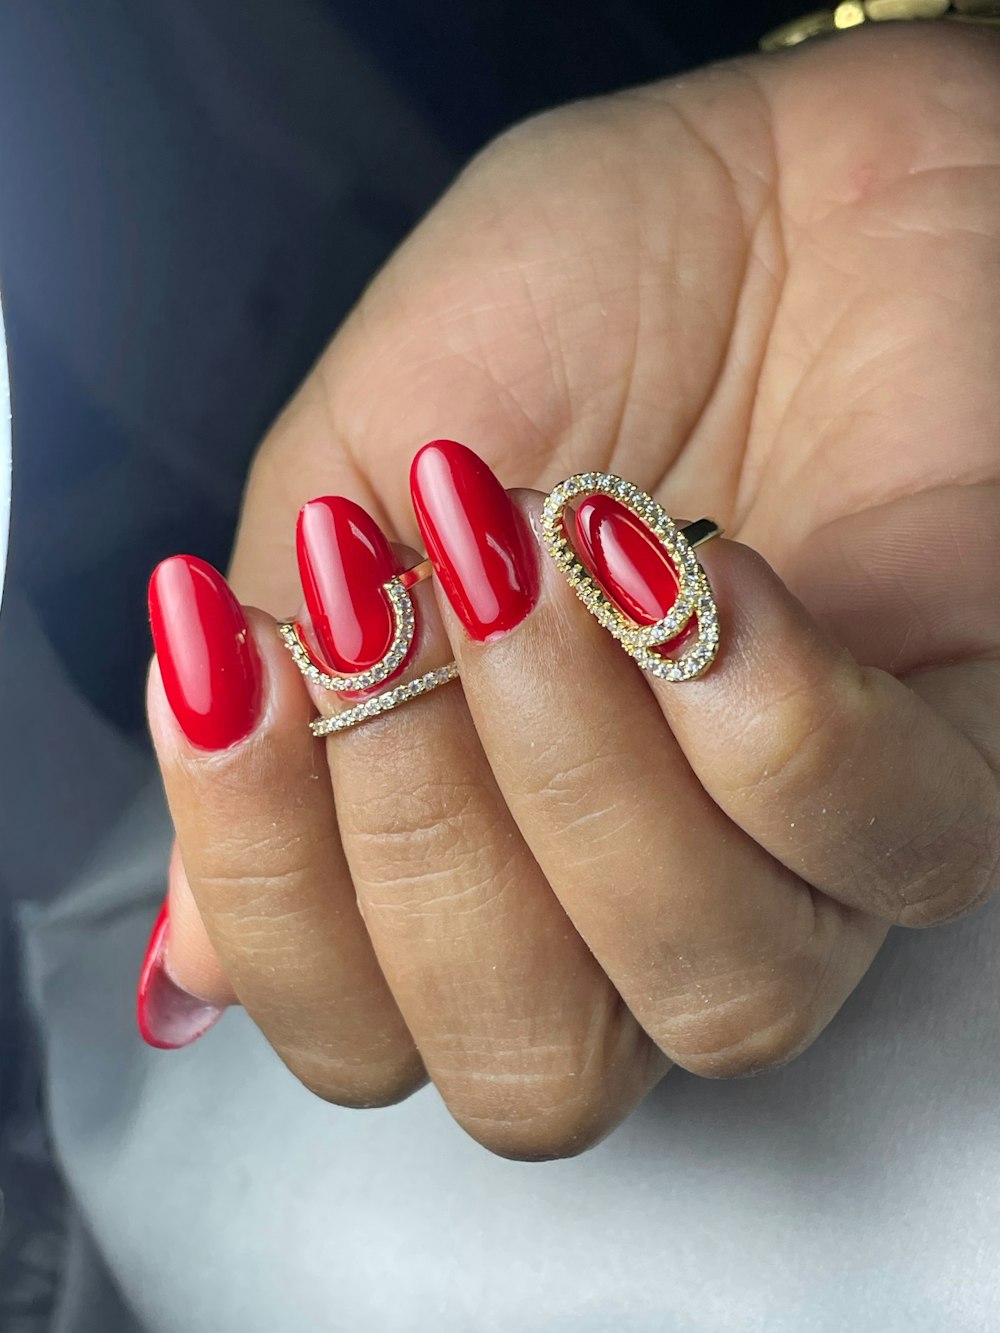 a woman's hand with a red manicure and a gold ring